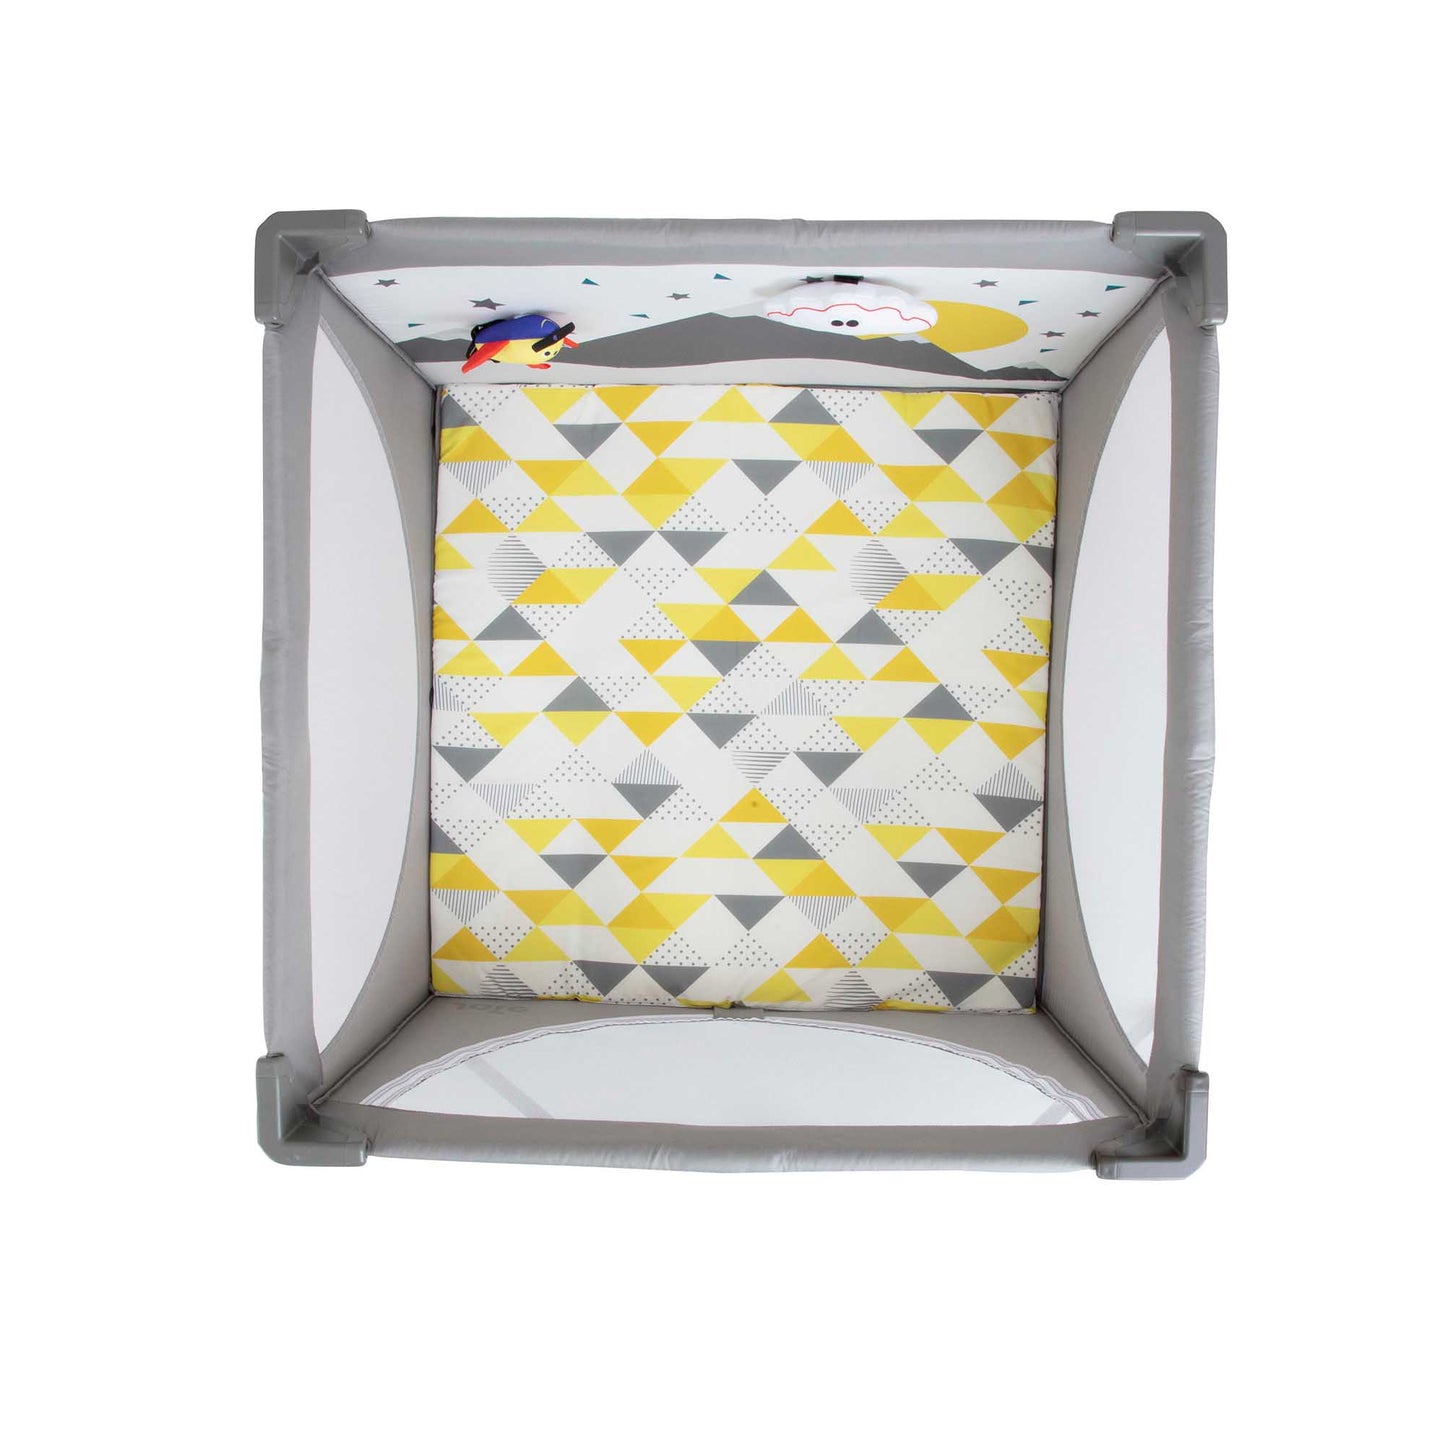 [Joie] Cheer Playpen with Tidy Carry Handle for Travelling and Storage